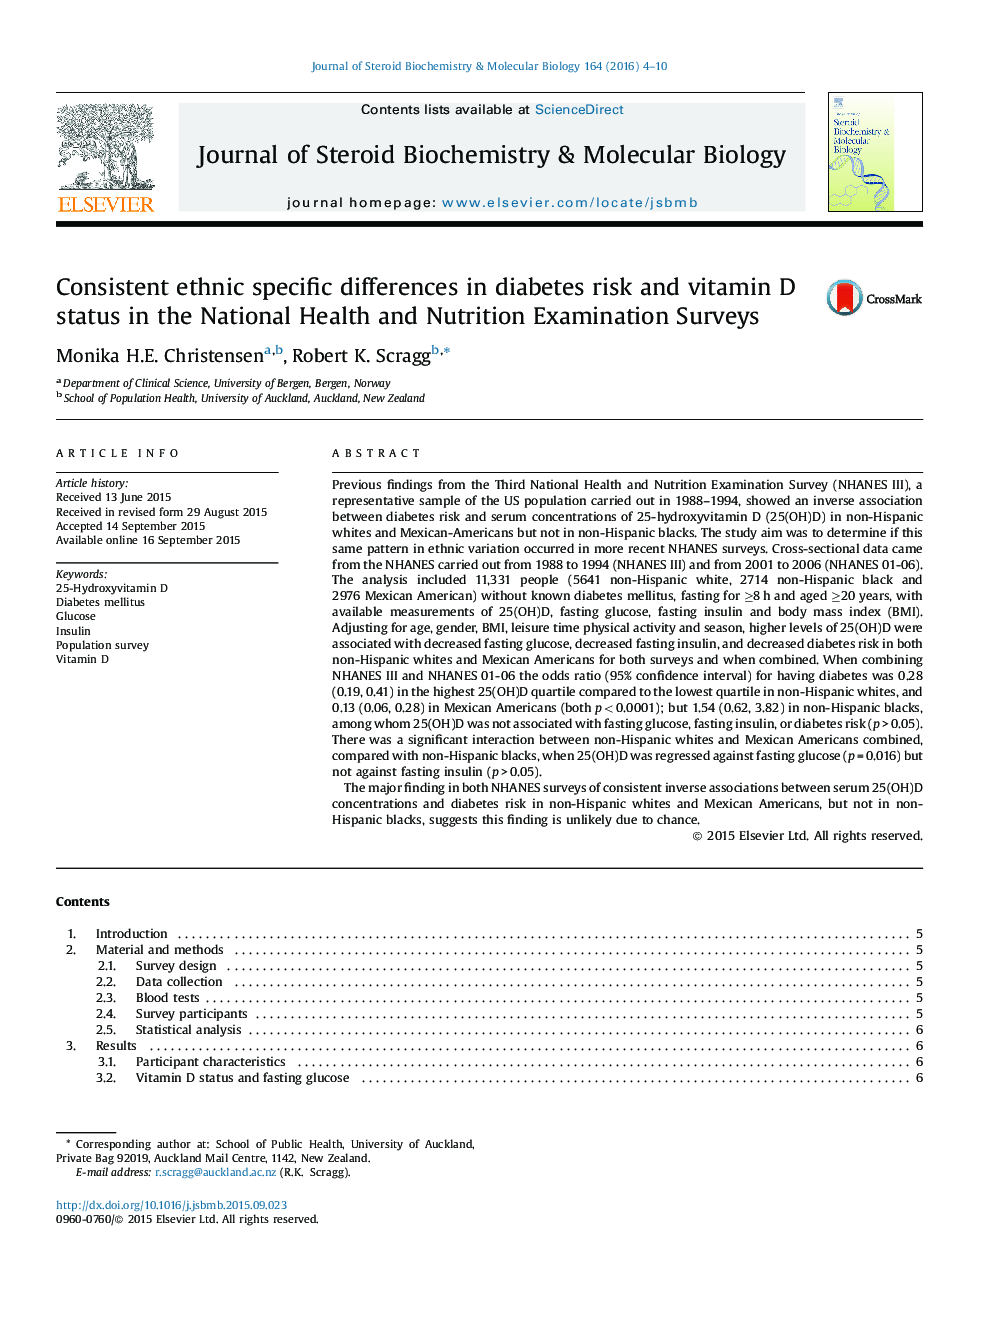 Consistent ethnic specific differences in diabetes risk and vitamin D status in the National Health and Nutrition Examination Surveys